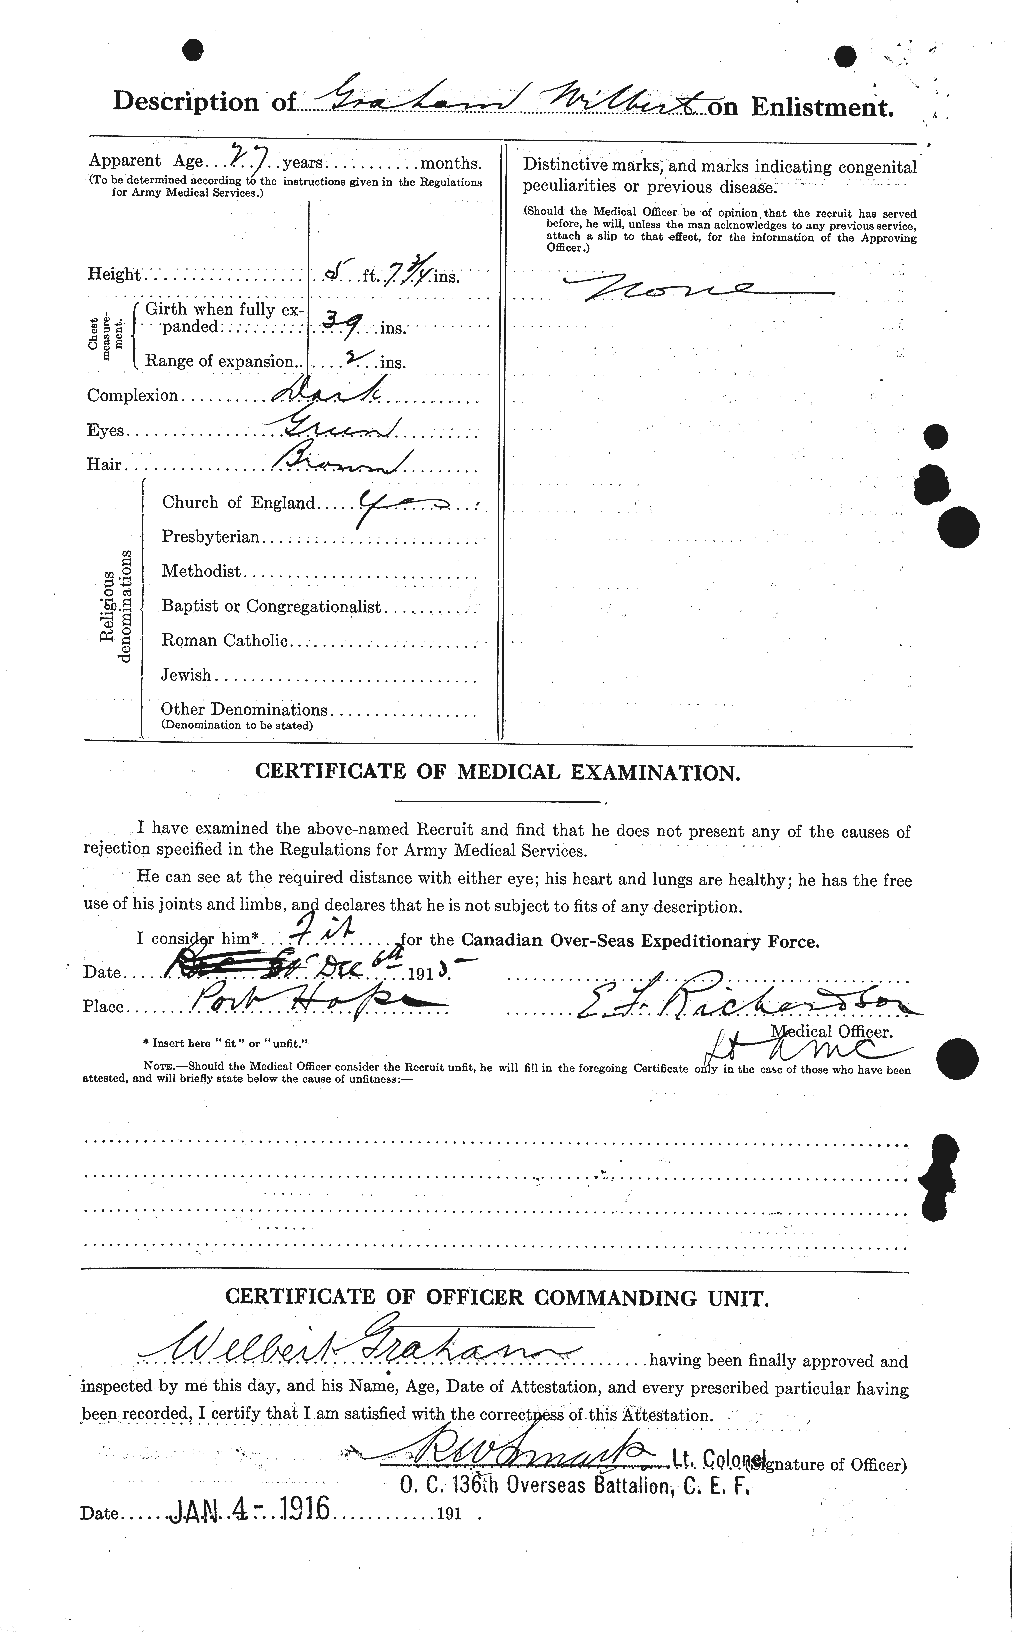 Personnel Records of the First World War - CEF 362669b